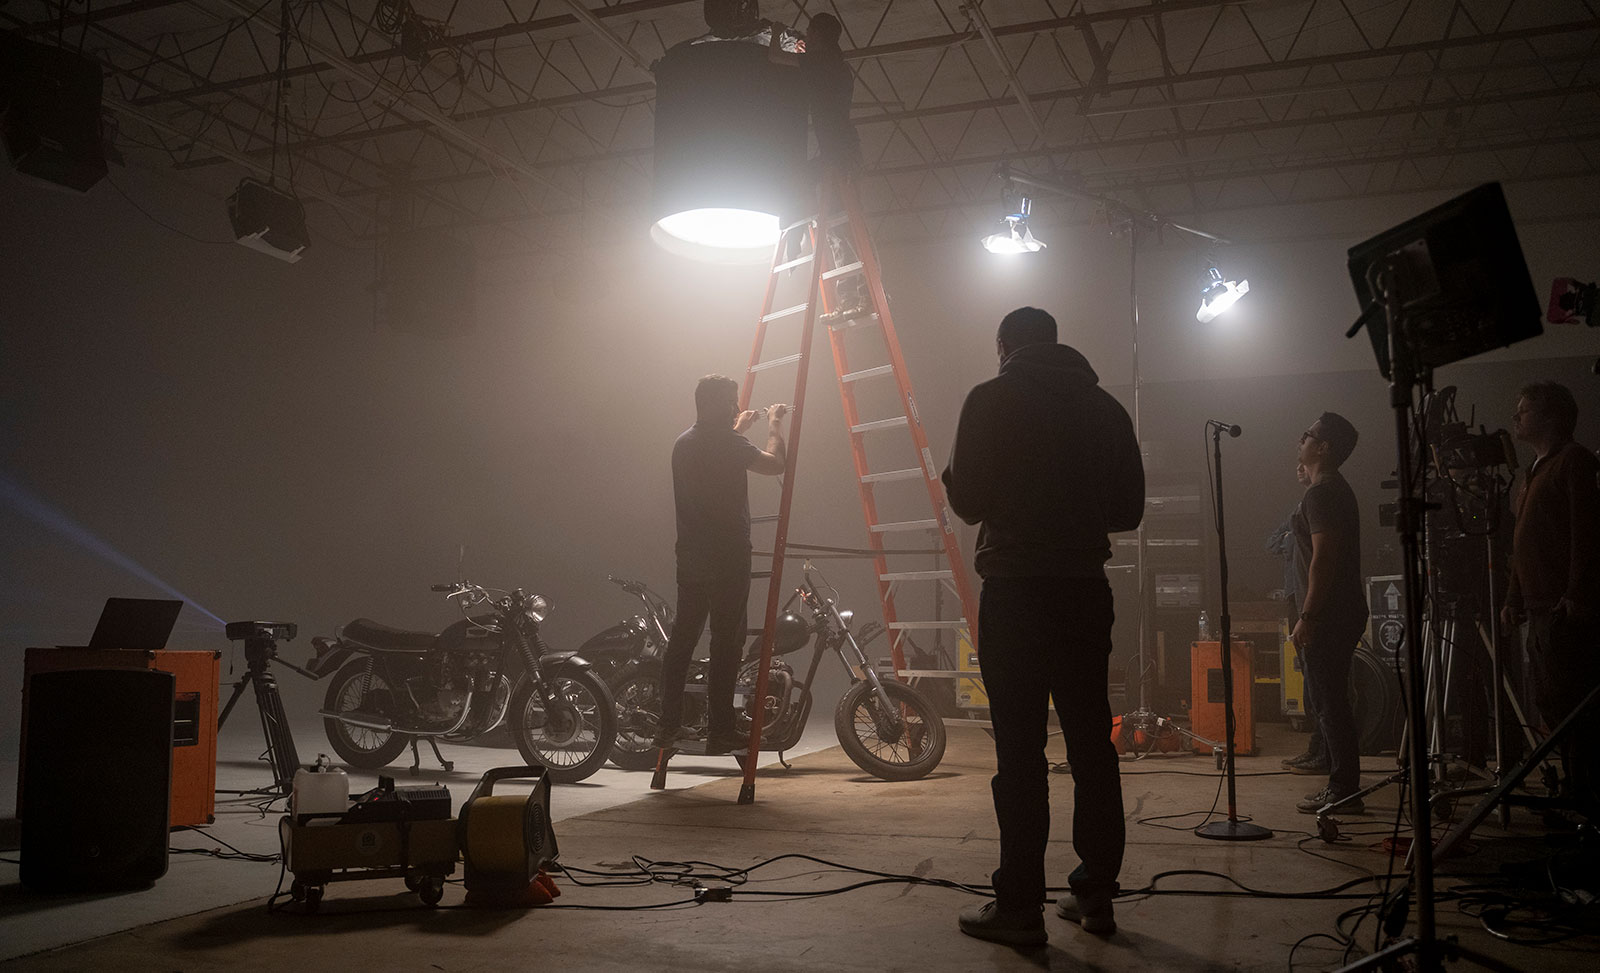 Arri Lighting, Ceiling Grid, and Space Lights on Music Video Shoot